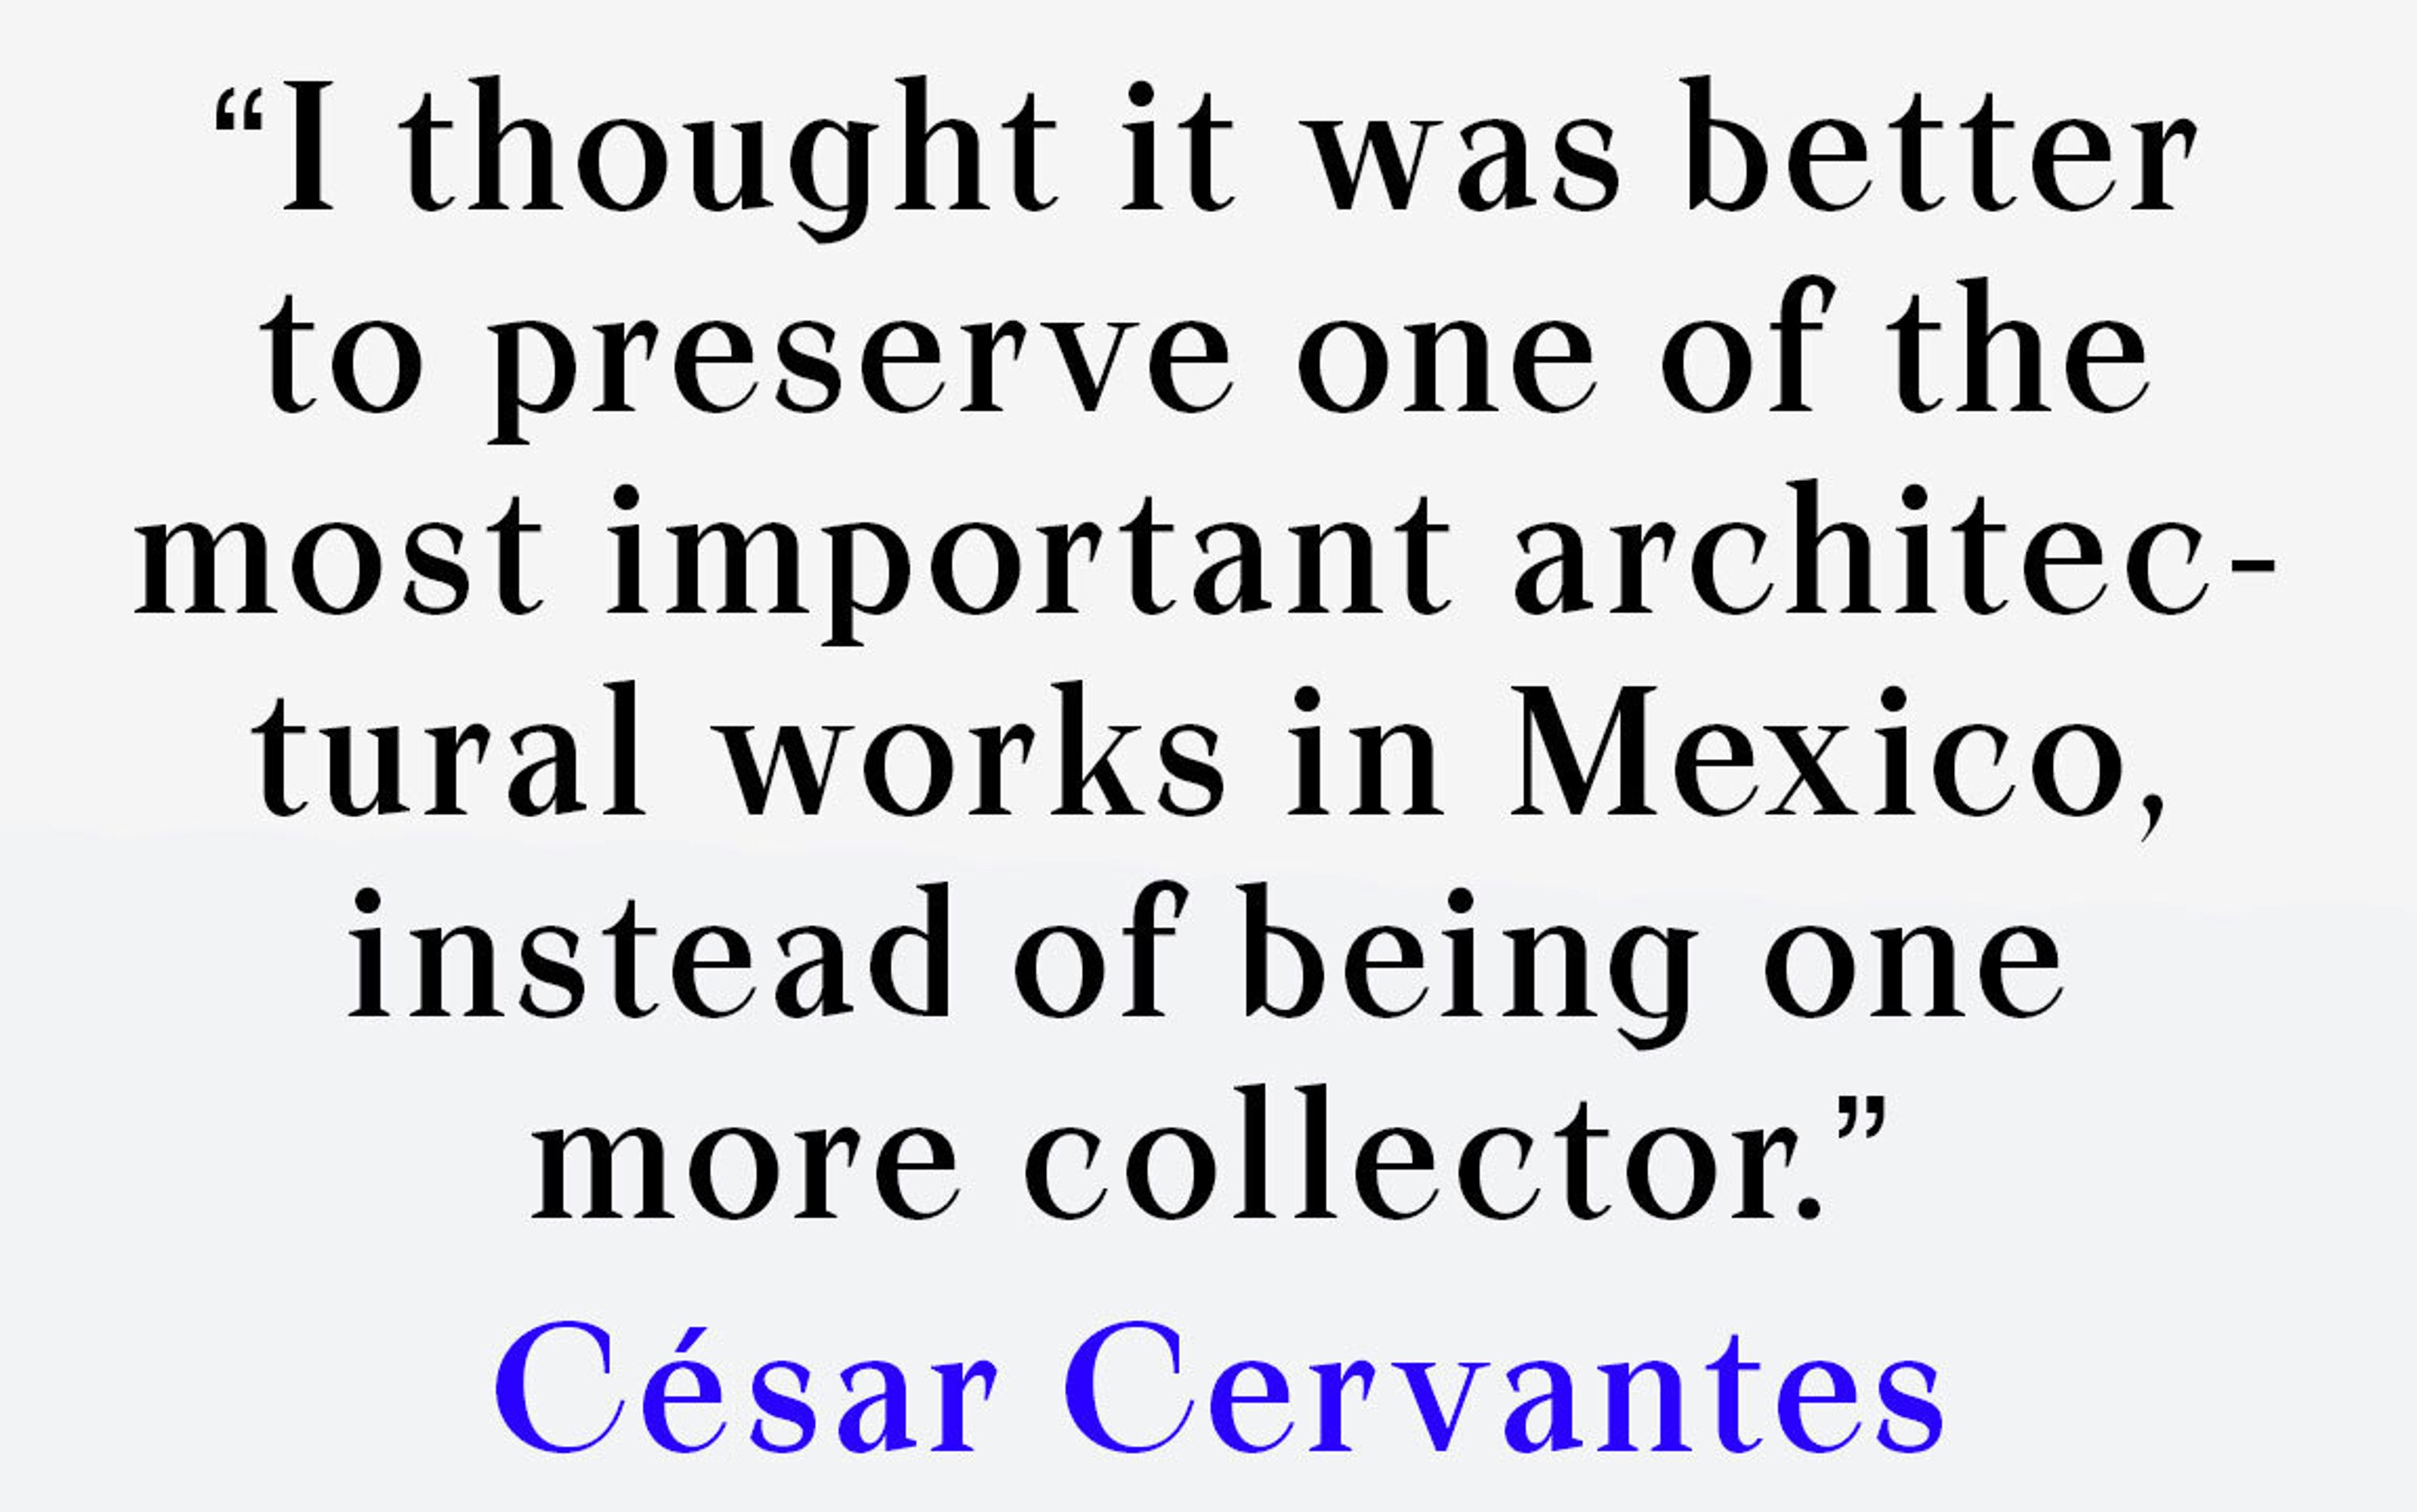 I thought it was better to preserve one of the most important architectural works in Mexico, instead of being one more collector.